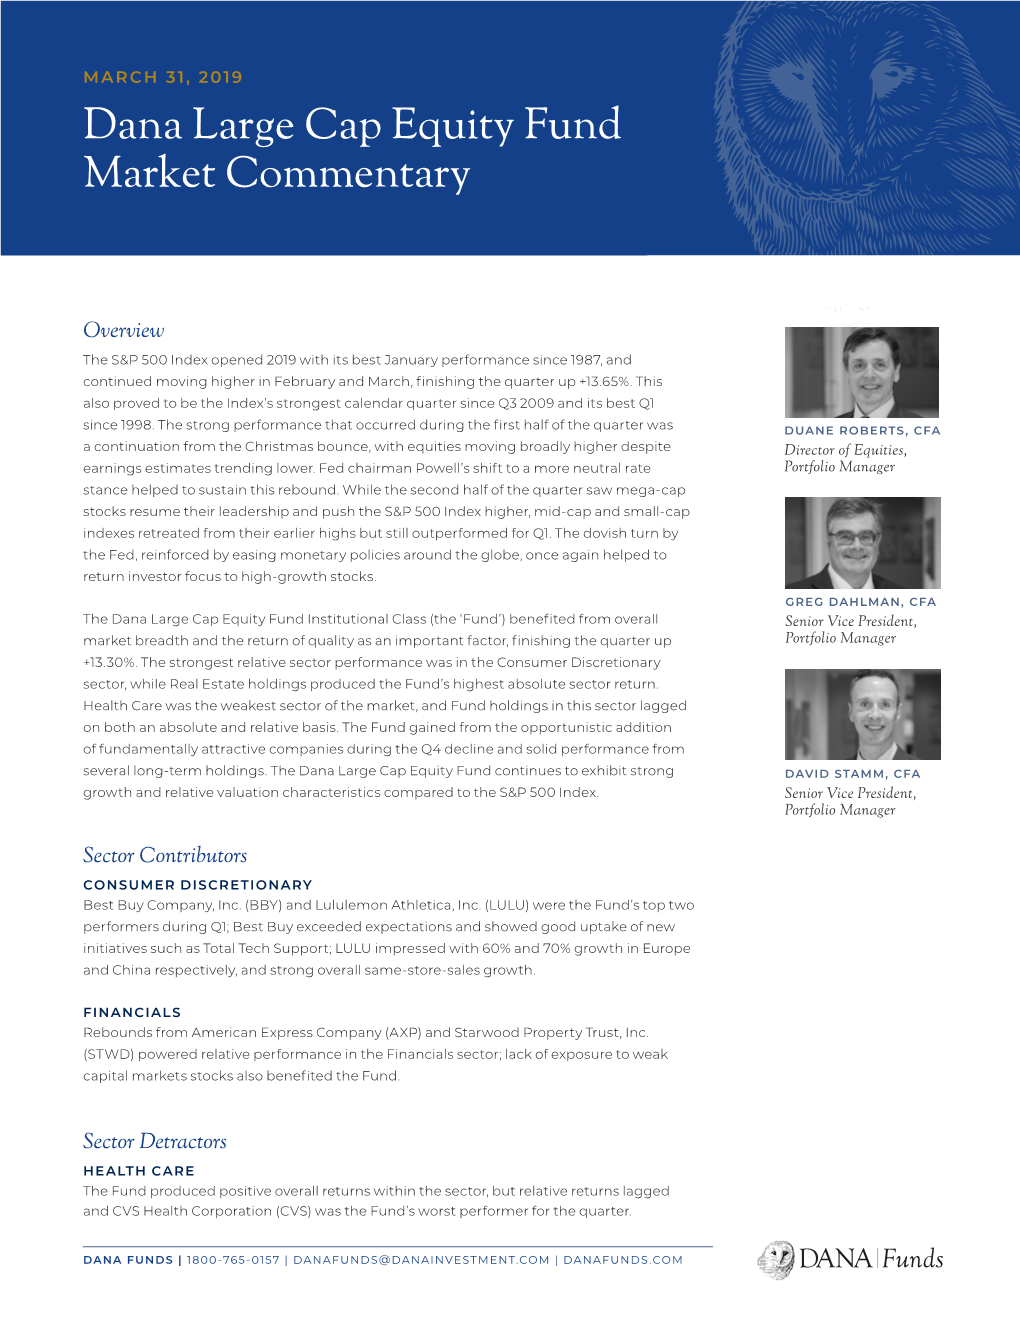 Dana Large Cap Equity Fund Market Commentary